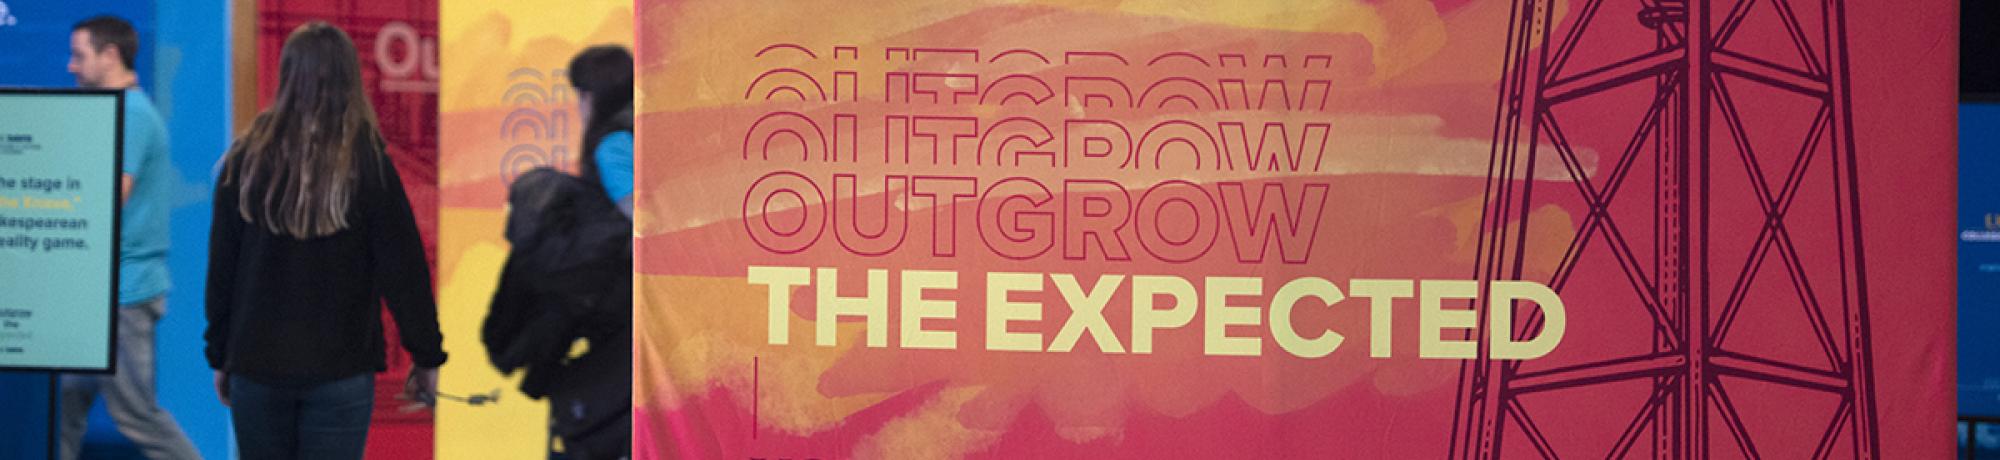 Outgrow the expected sign